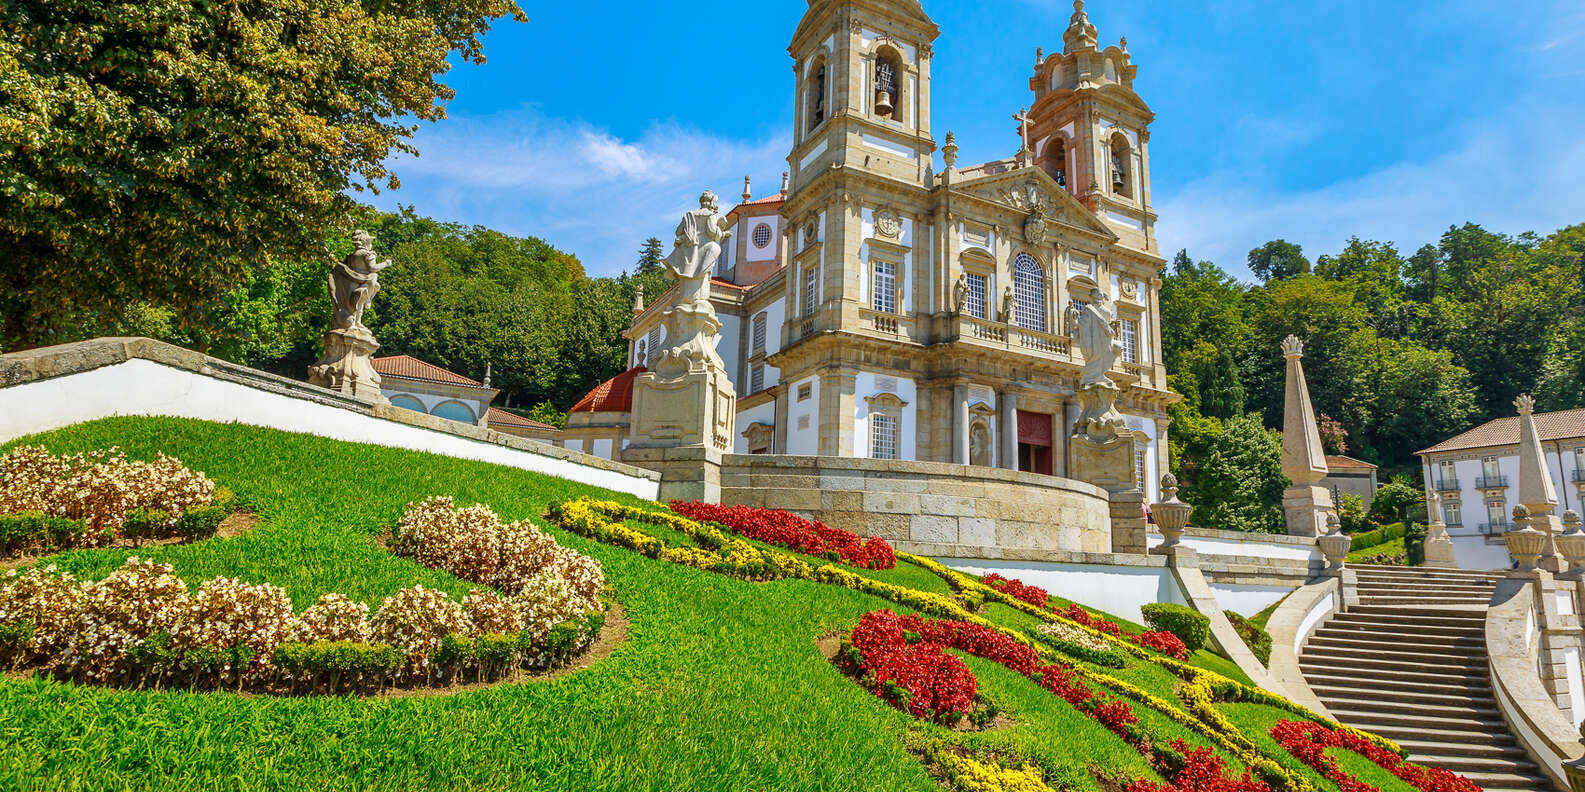 What to do in Braga